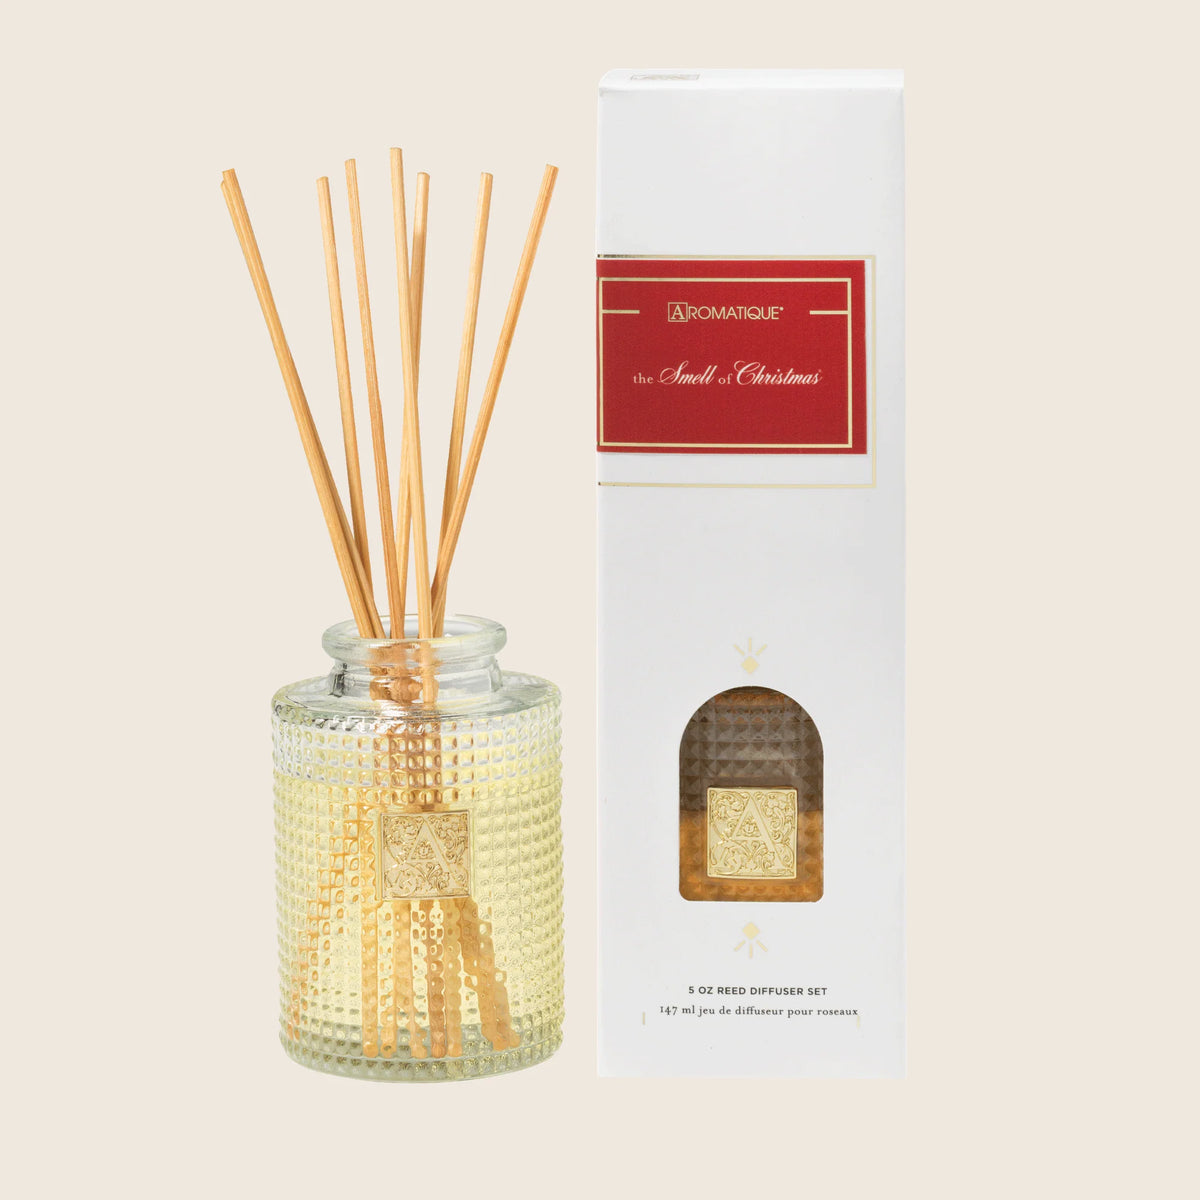 Aromatique - The Smell Of Christmas Reed Diffuser Set